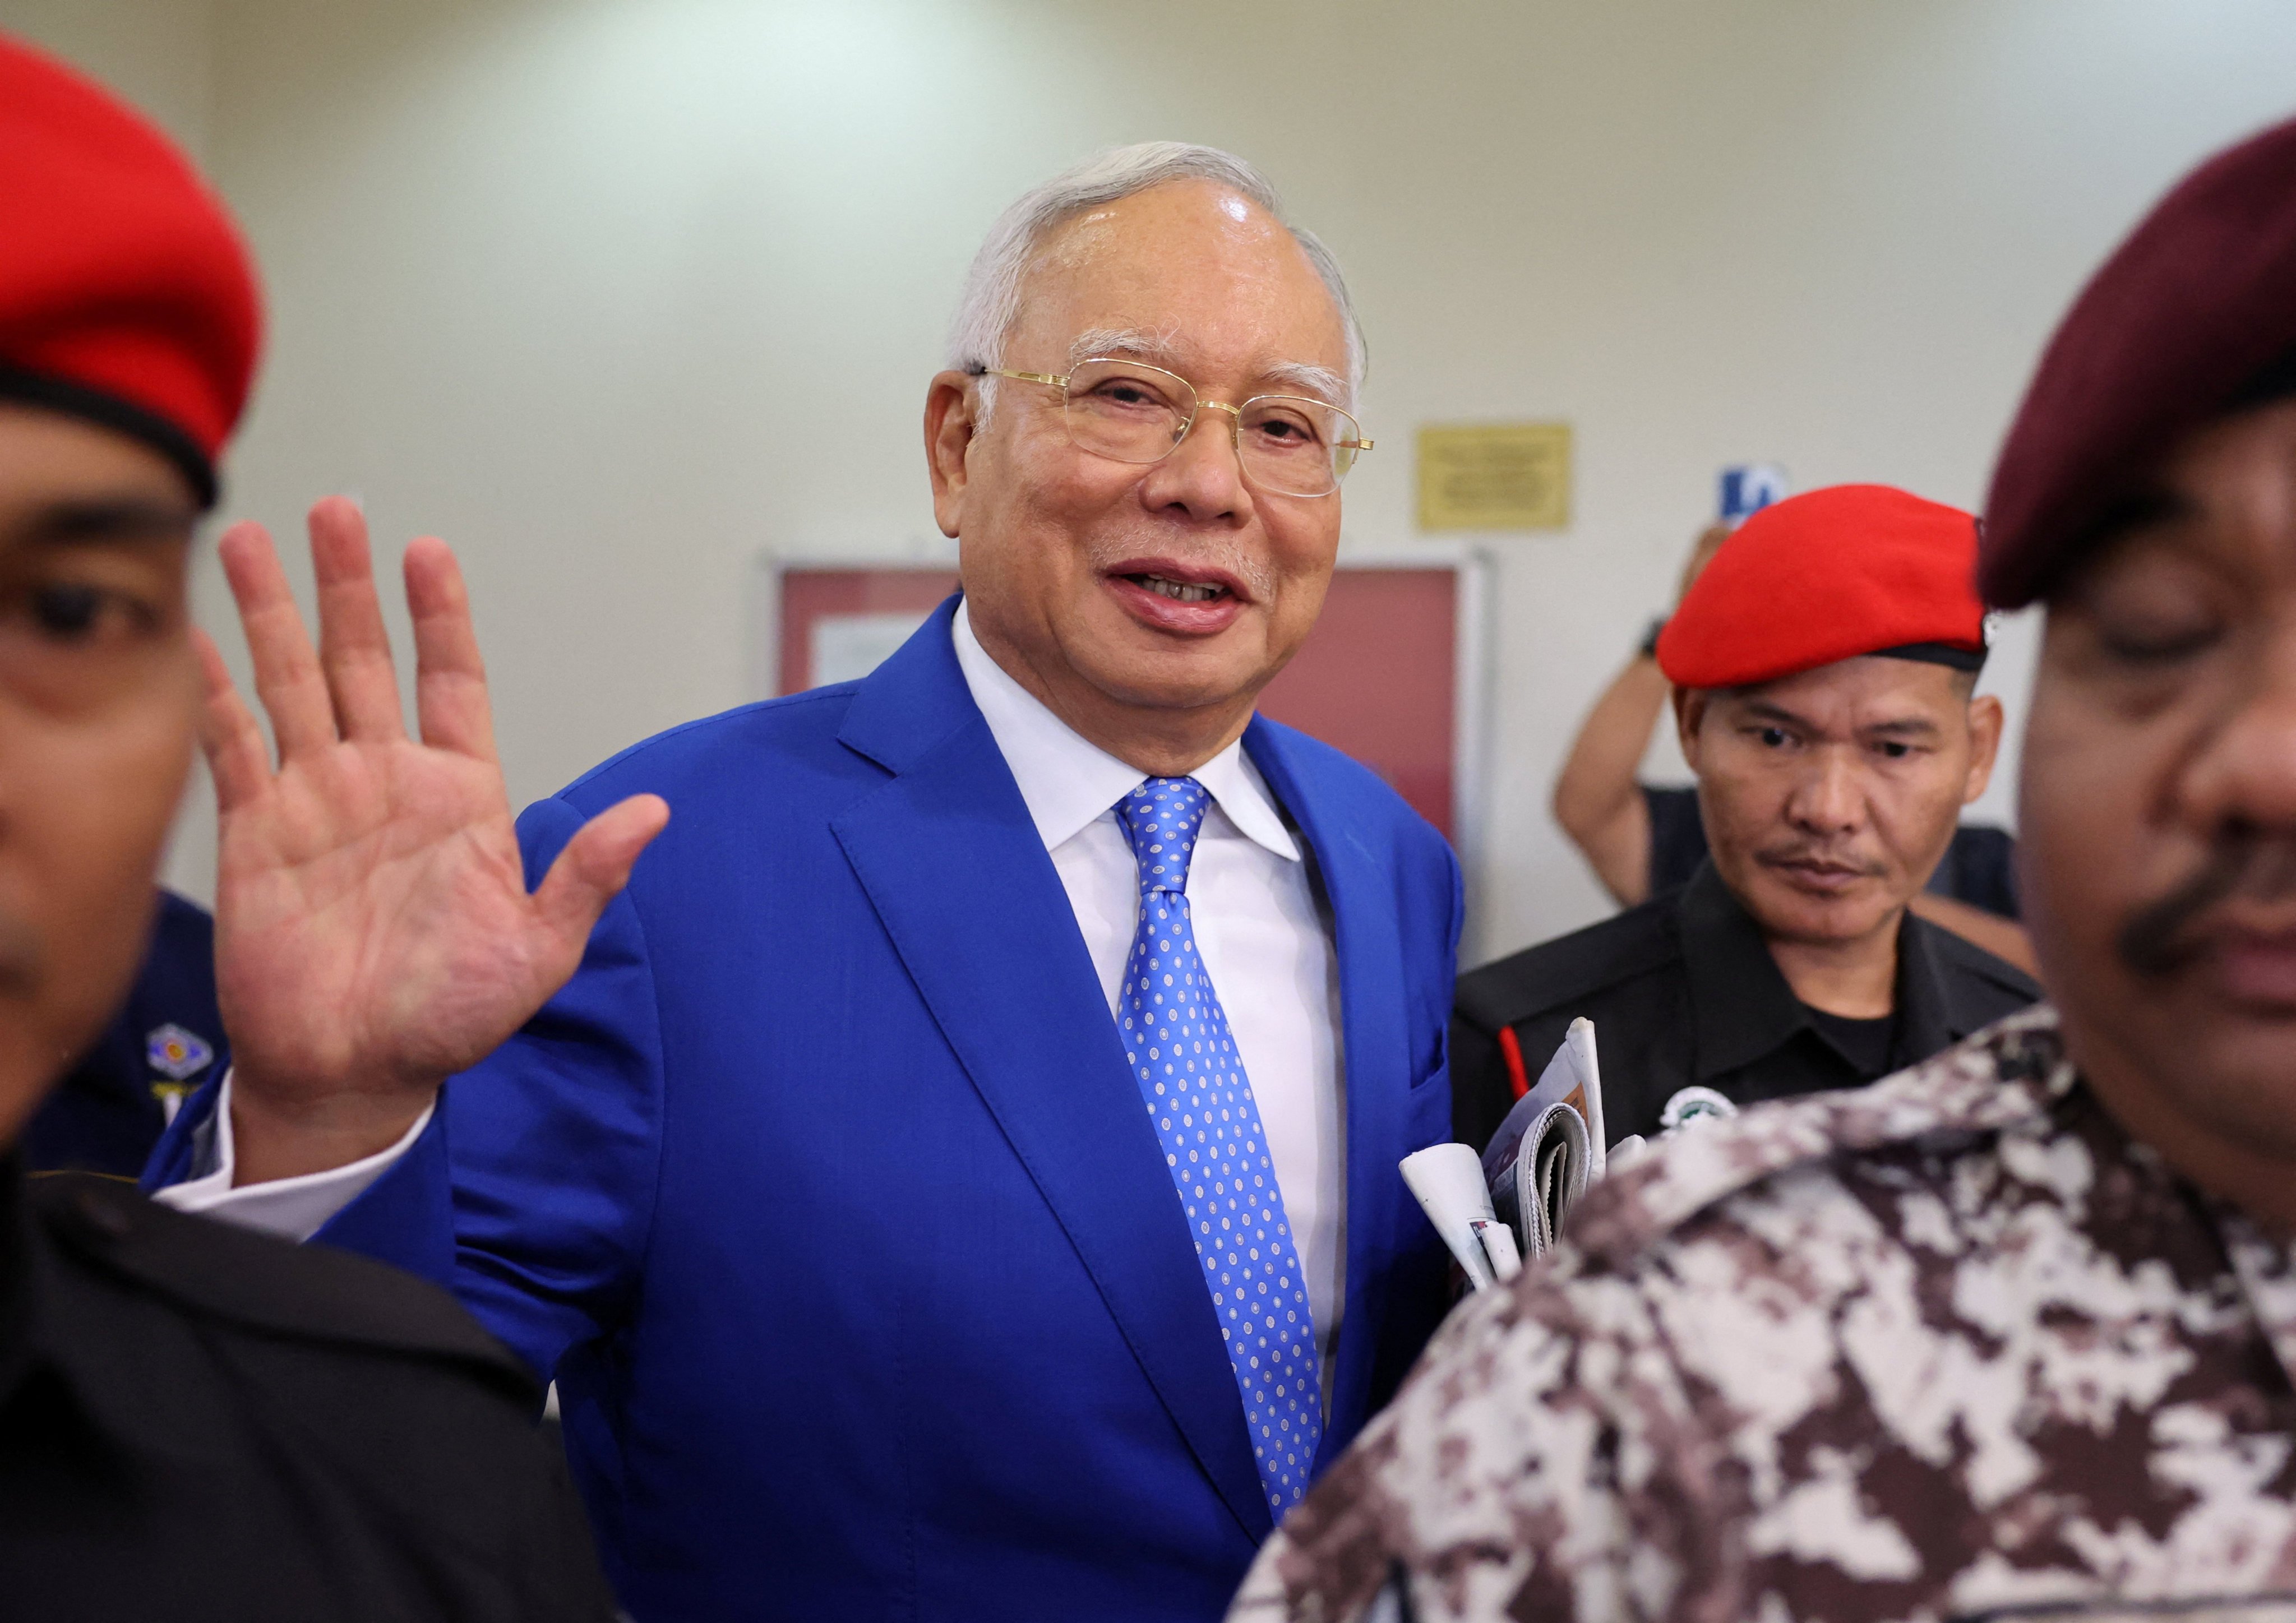 Former Malaysian Prime Minister Najib Razak waves as he leaves court in Kuala Lumpur last month. Photo: Reuters